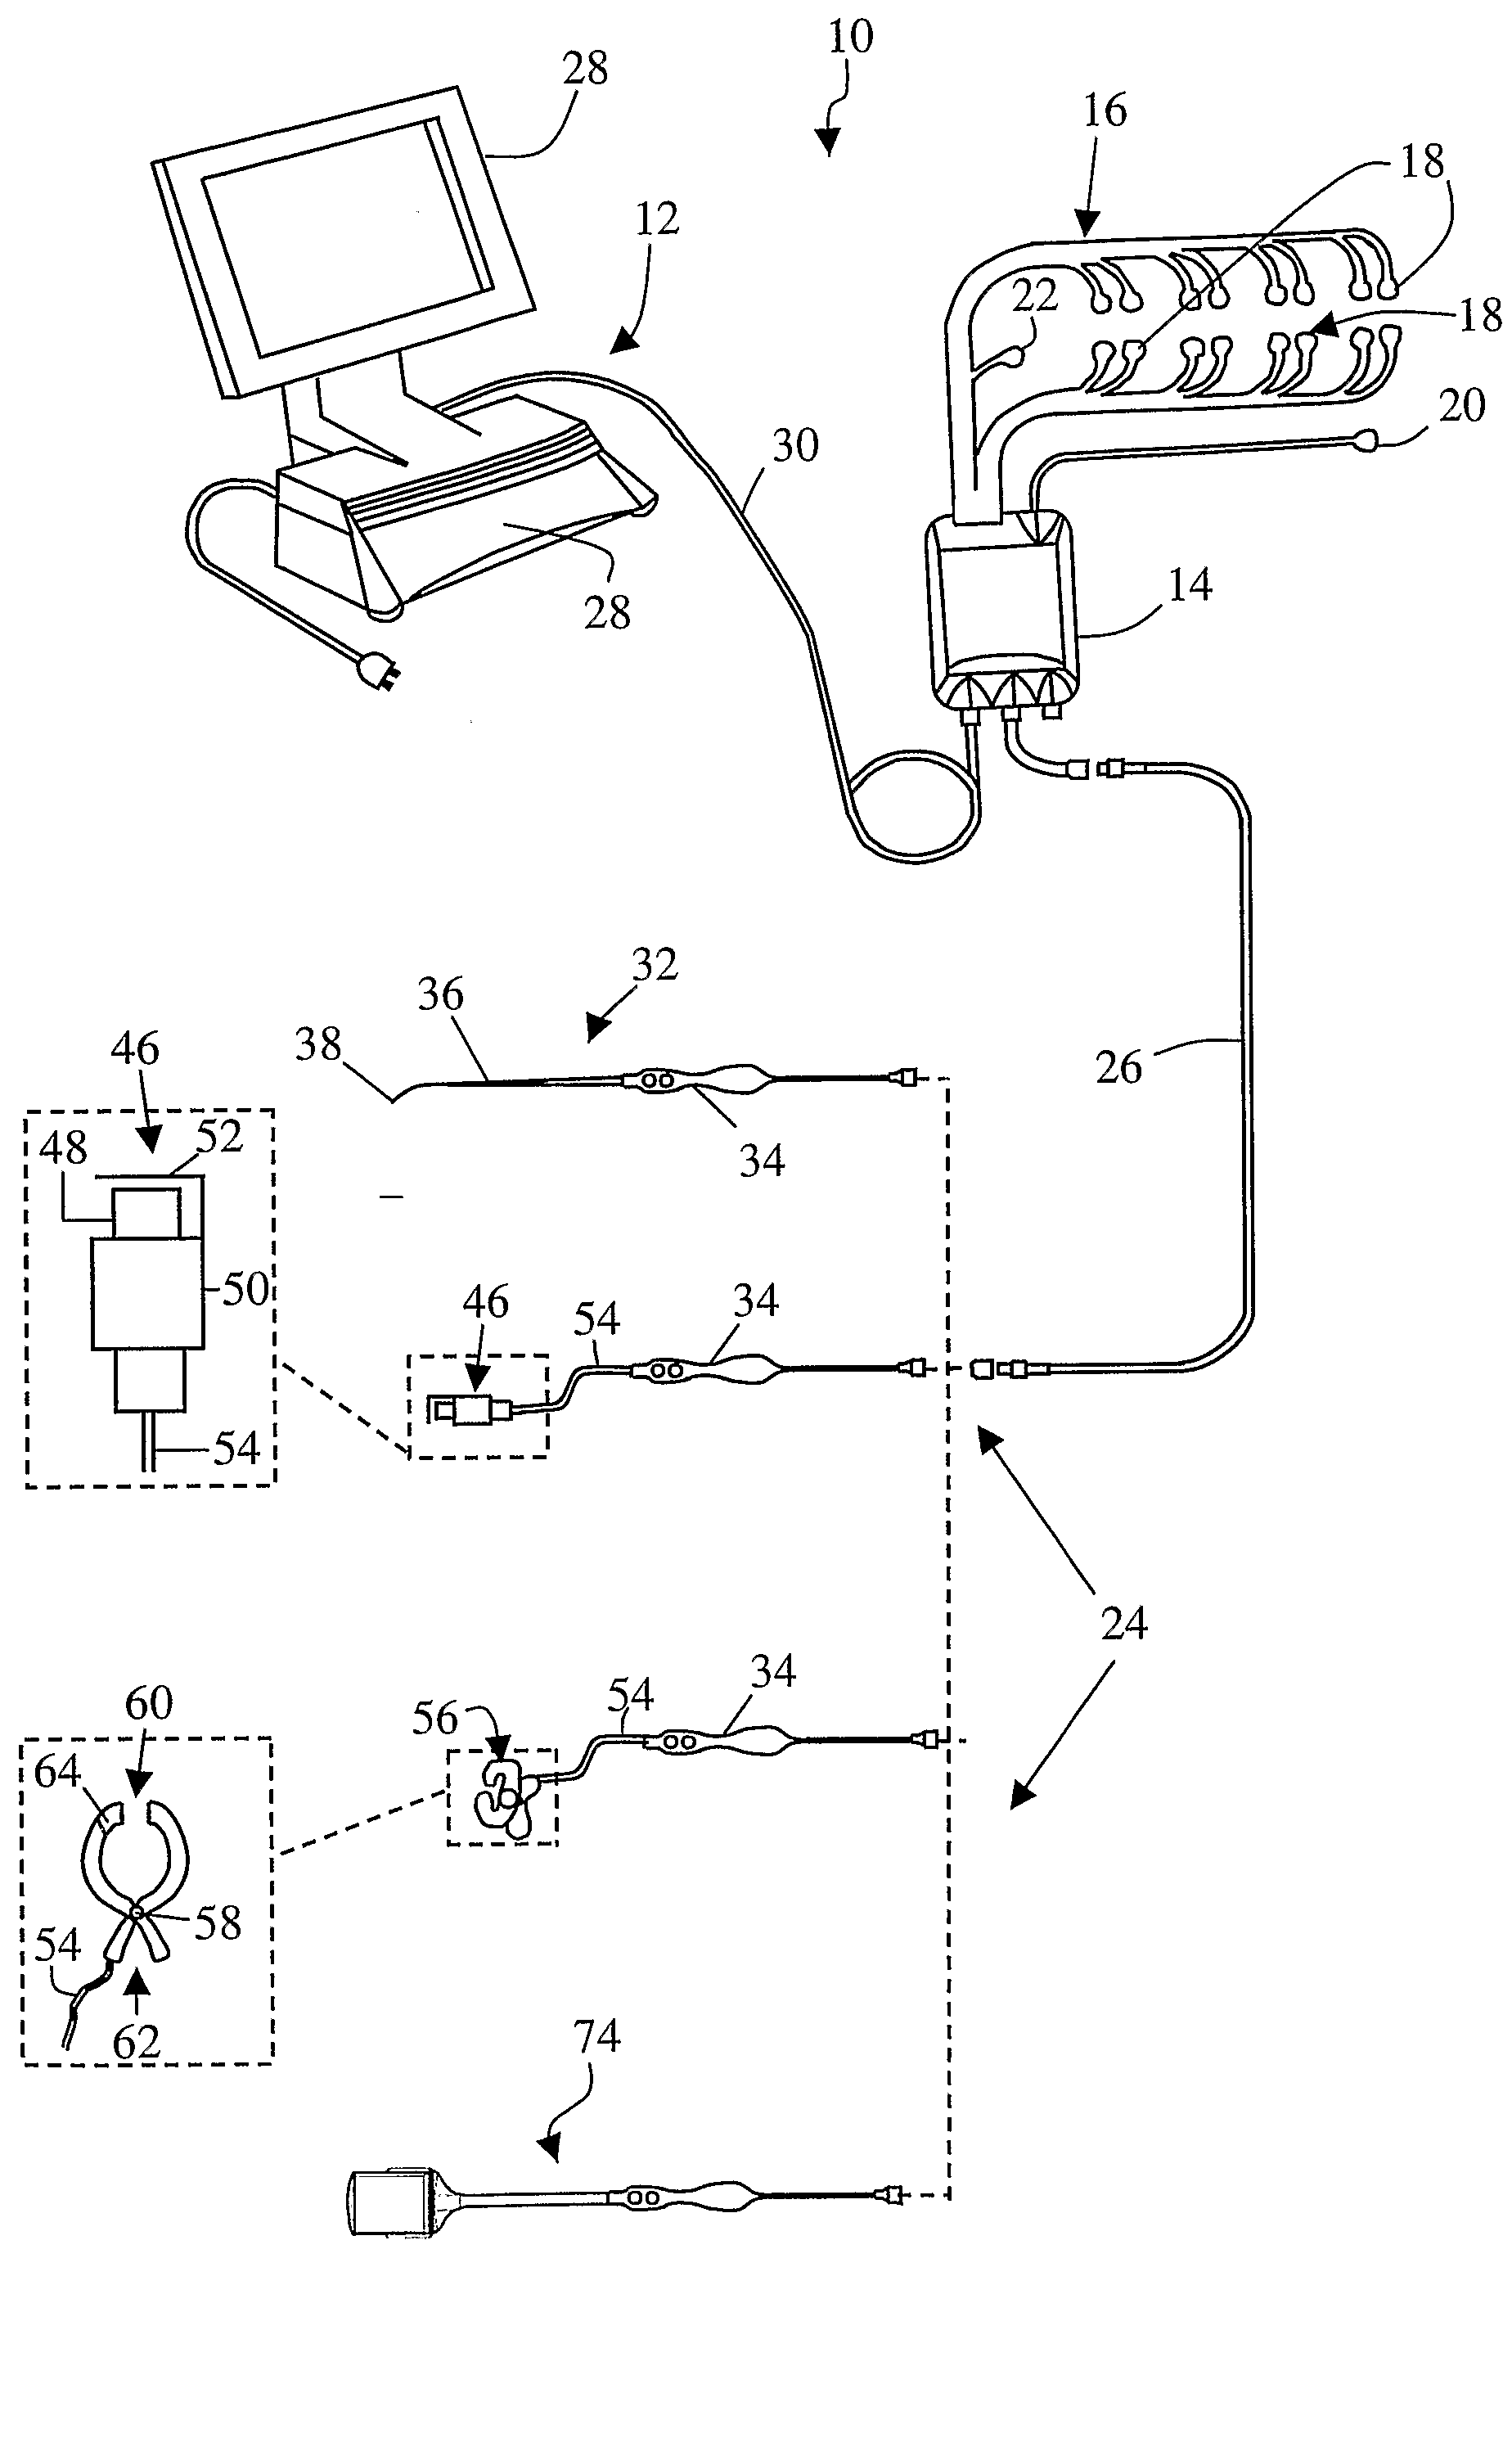 System and Methods for Monitoring During Anterior Surgery